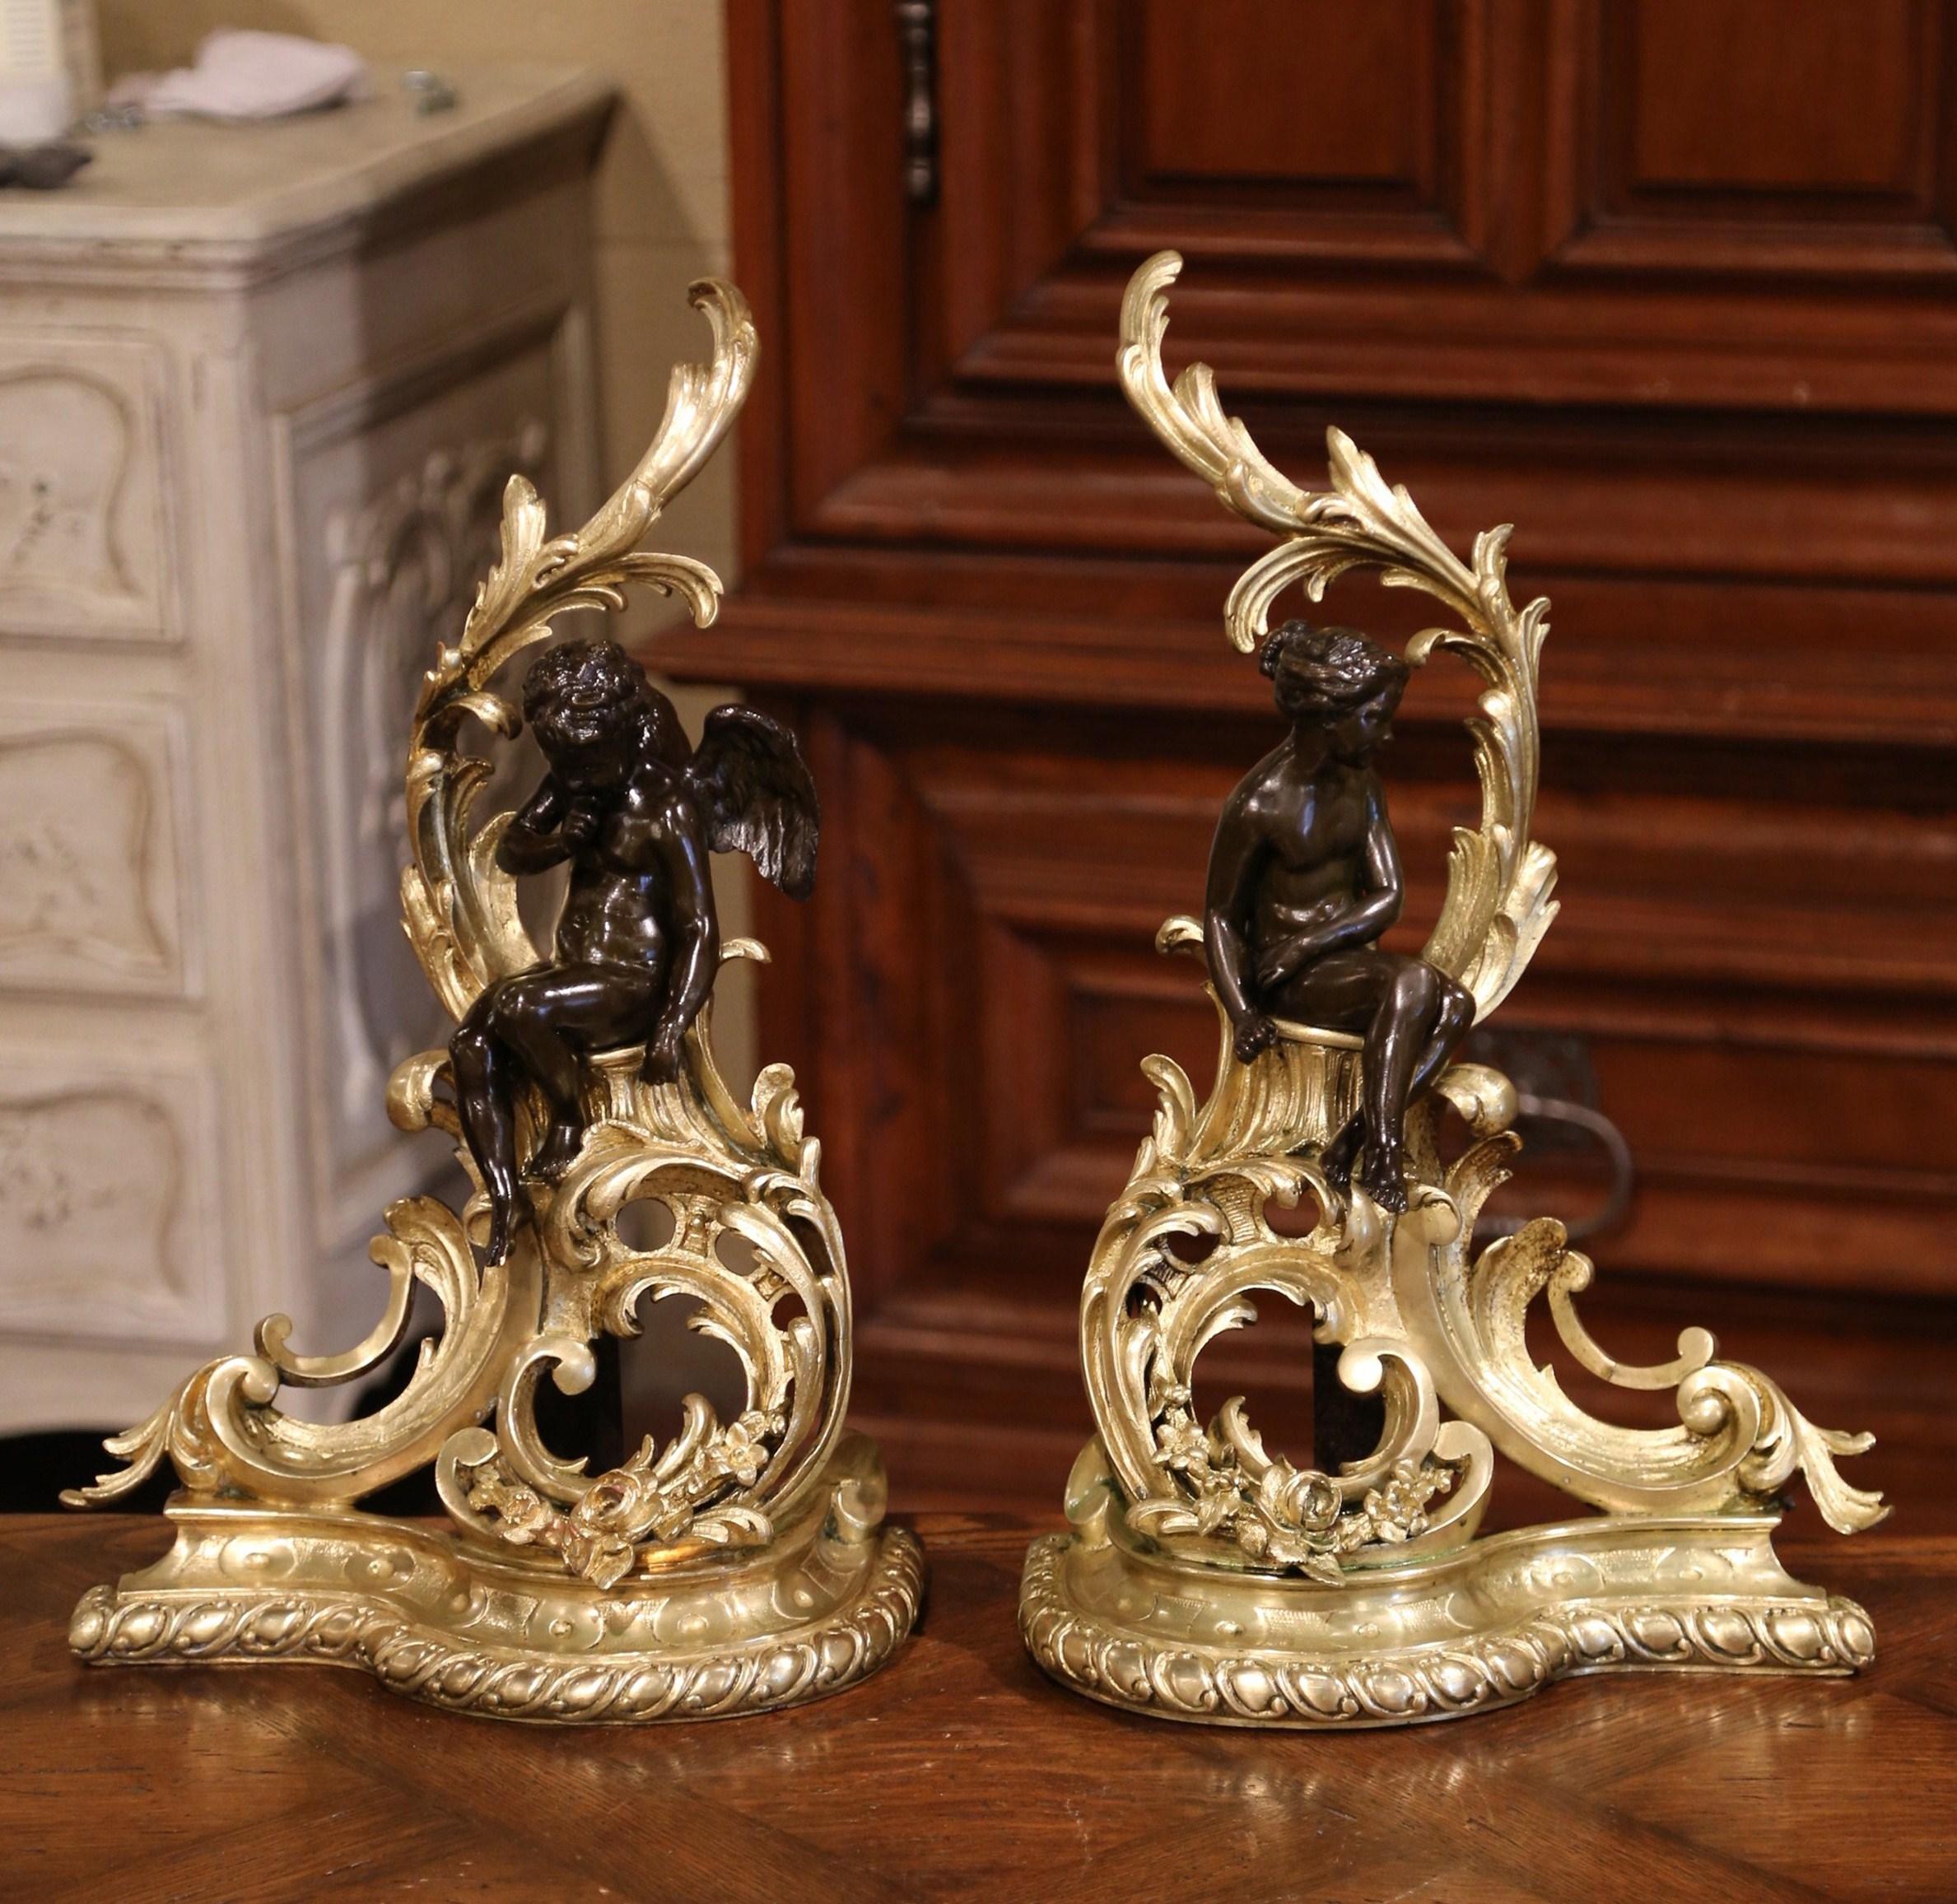 Decorate your fireplace with this elegant pair of antique two-tone bronze chenets. Crafted in France, circa 1860, the sculpted andirons feature intricate foliage and leaf decor embellished with a patinated cherub and female figures, both sited on